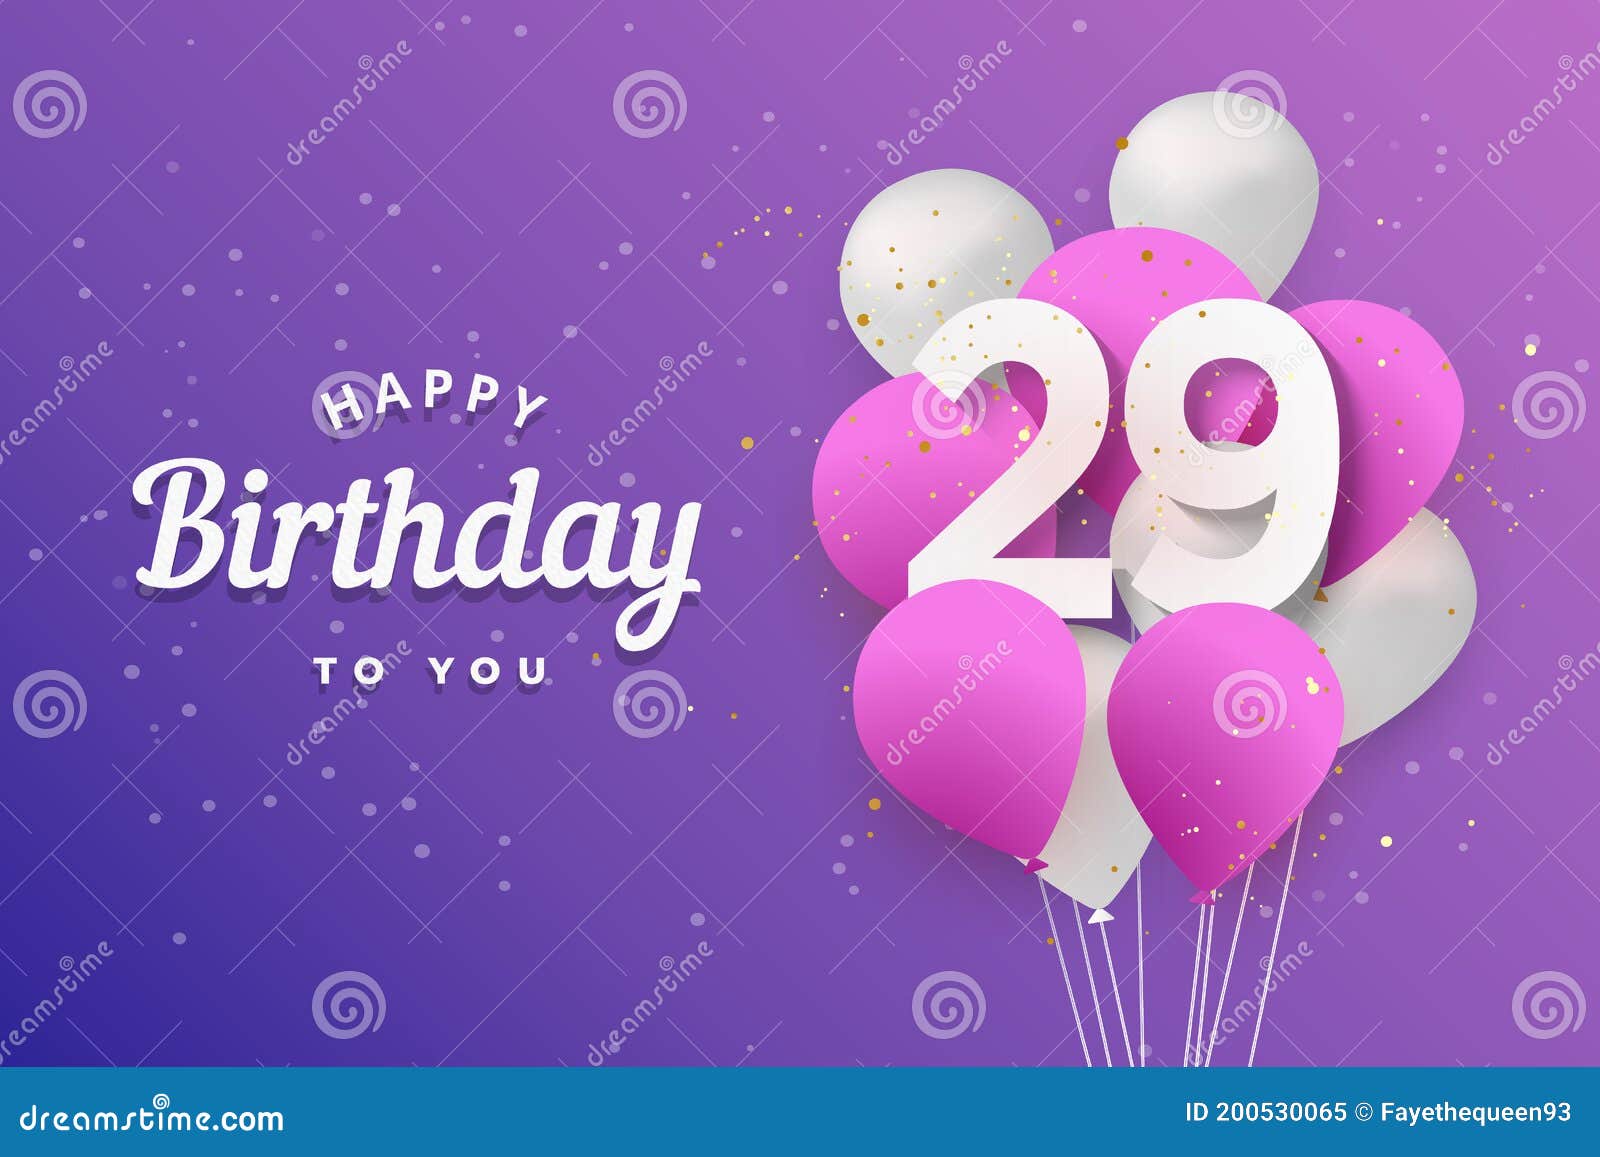 Happy 29th Birthday Balloons Greeting Card Background Stock Vector